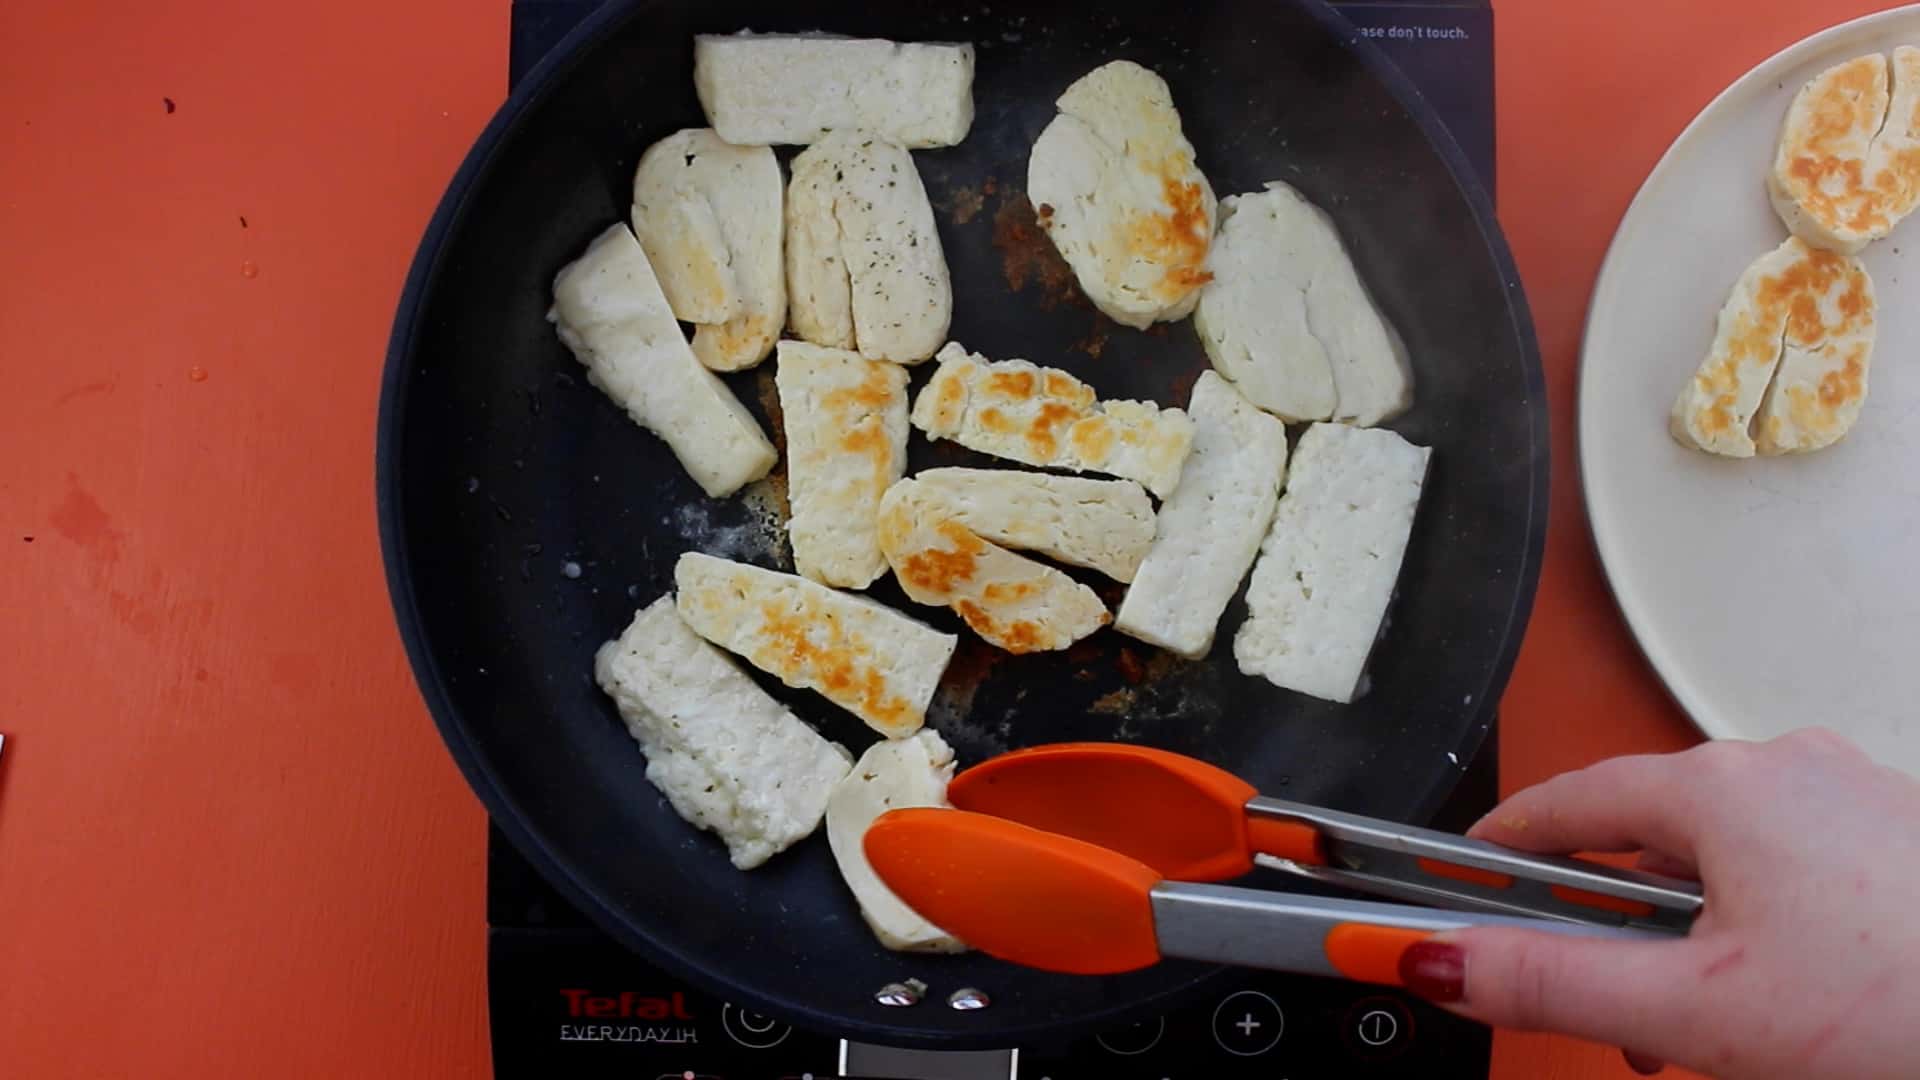 Halloumi being fried in pan until golden brown then halloumi pieces removed from pan with tongs onto plate